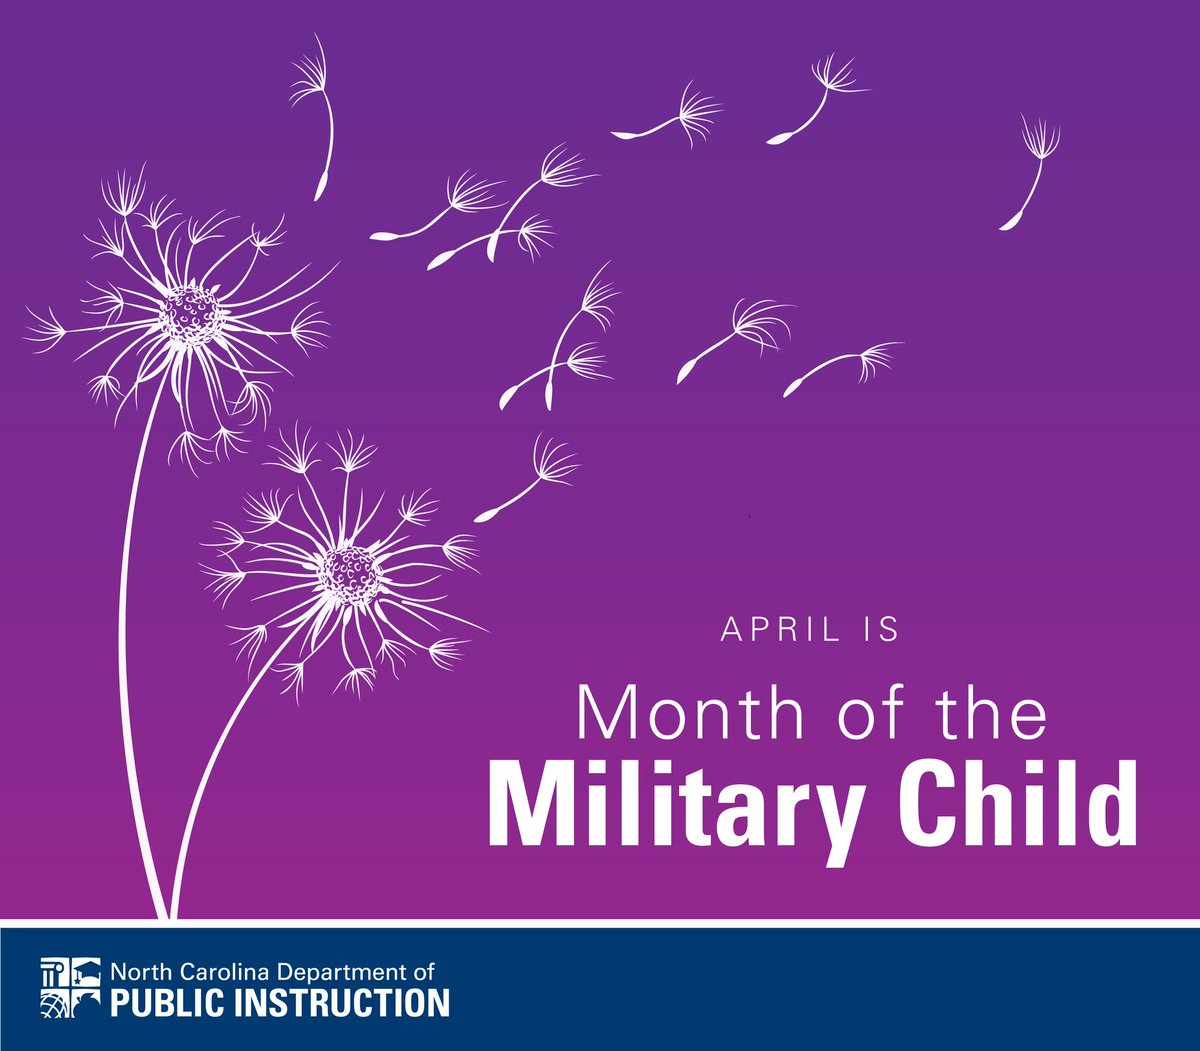 April is Month of the Military Child! Show support for over 110,000 military-connected kids in NC by wearing purple on Purple Up Day, a color that represents all branches of the military. Check with your school or district to see which date has been designated as Purple Up Day.